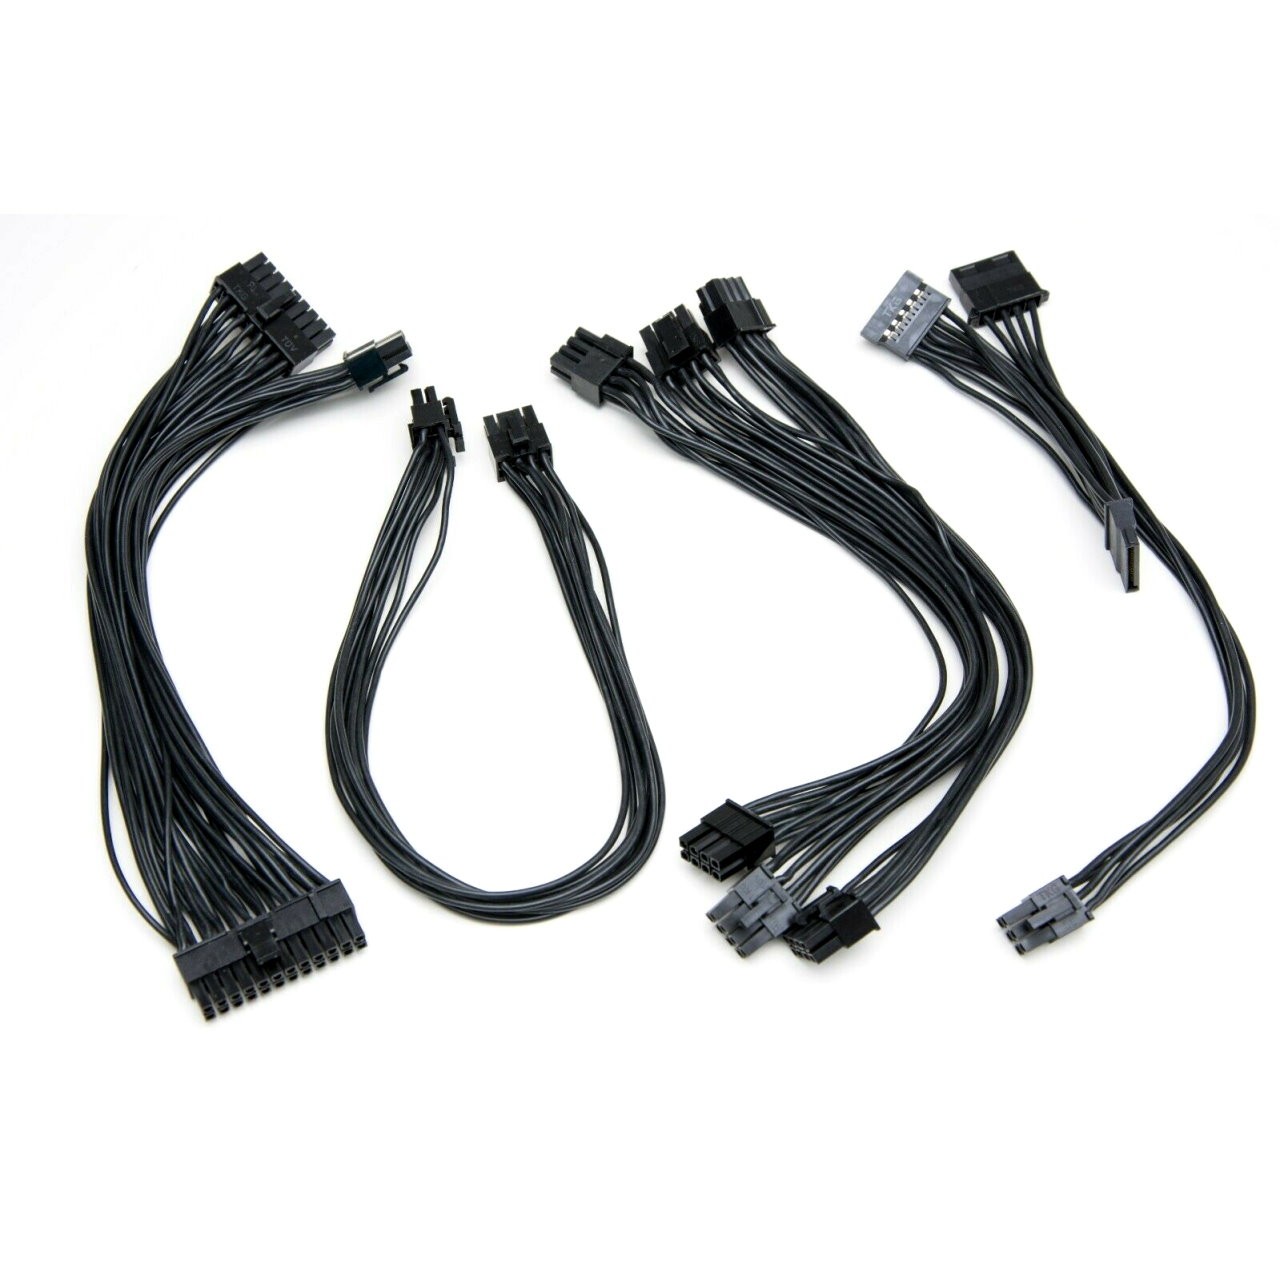 https://www.moddiy.com/product_images/r/120/Premium_Silicone_Ultra_Soft_and_Flexible_Cable_Kit_for_ITX_SFF_Builds_%2810%29__74401_zoom.jpg